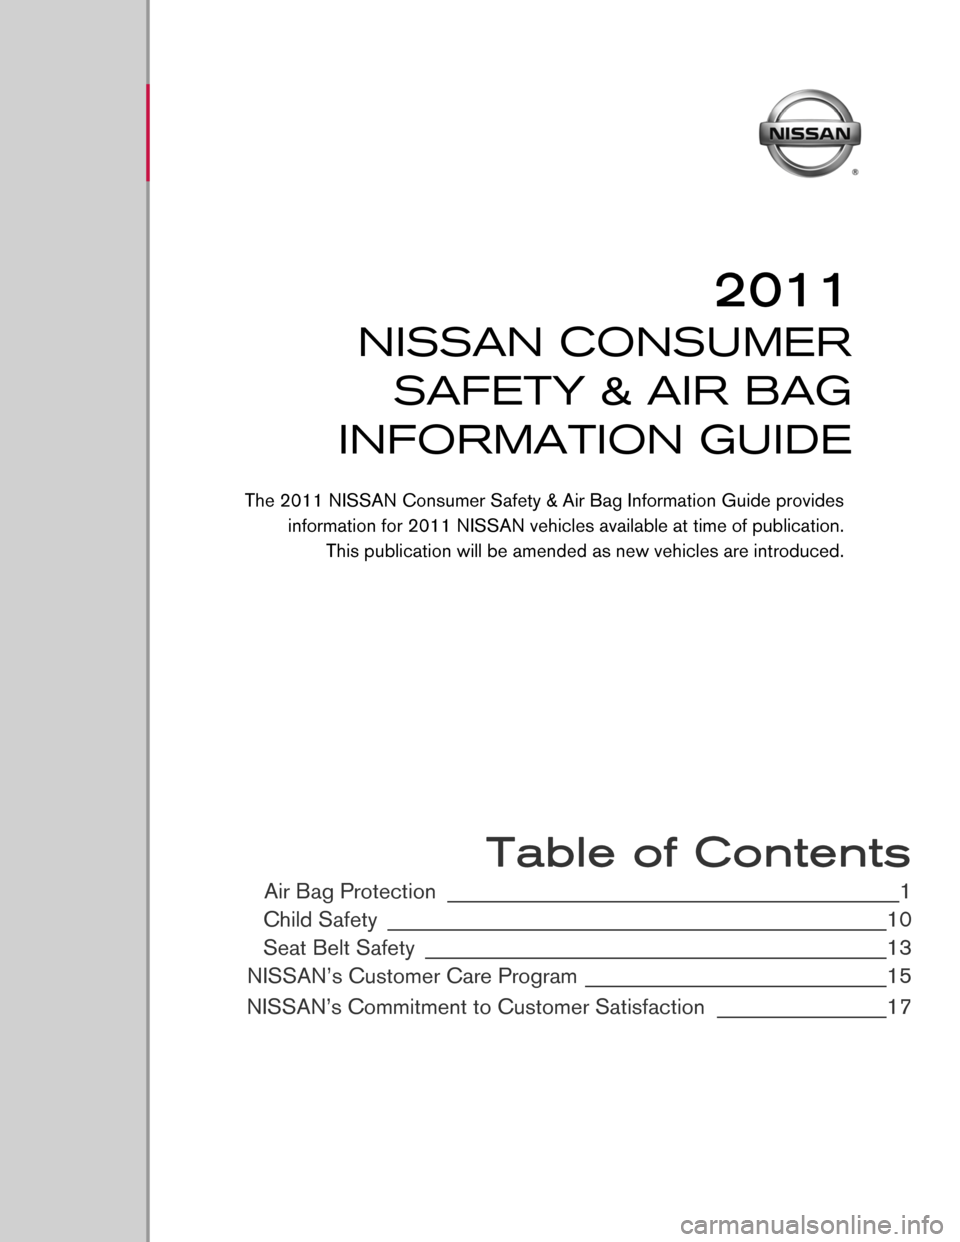 NISSAN CUBE 2011 3.G Consumer Safety Air Bag Information Guide  
 
 
 
 
 
 
 
 
 
 
 
 
 
 
 
 
 
 
 
 
 
 
 Table of Contents
Air Bag Protection ________________________________________________1
Child Safety
 ____________________________________________________